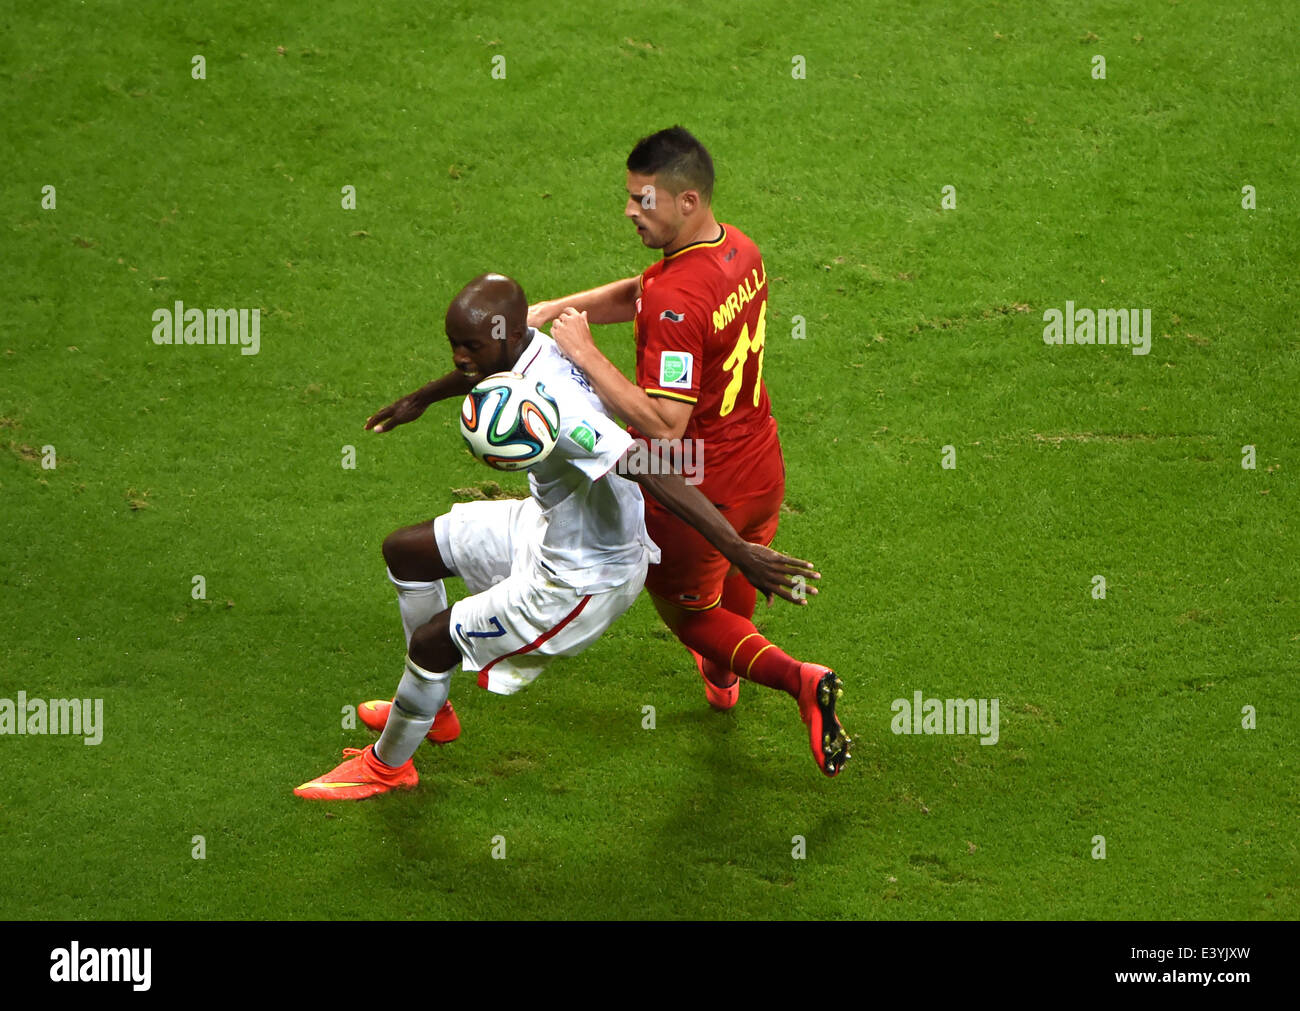 Salvador, Brazil. 1st July, 2014. Belgium's Kevin Mirallas (R) vies with DaMarcus Beasley of the U.S. during a Round of 16 match between Belgium and the U.S. of 2014 FIFA World Cup at the Arena Fonte Nova Stadium in Salvador, Brazil, on July 1, 2014. Belgium won 2-1 over the U.S. after 120 minutes and qualified for quarter-finals on Tuesday. Credit:  Guo Yong/Xinhua/Alamy Live News Stock Photo